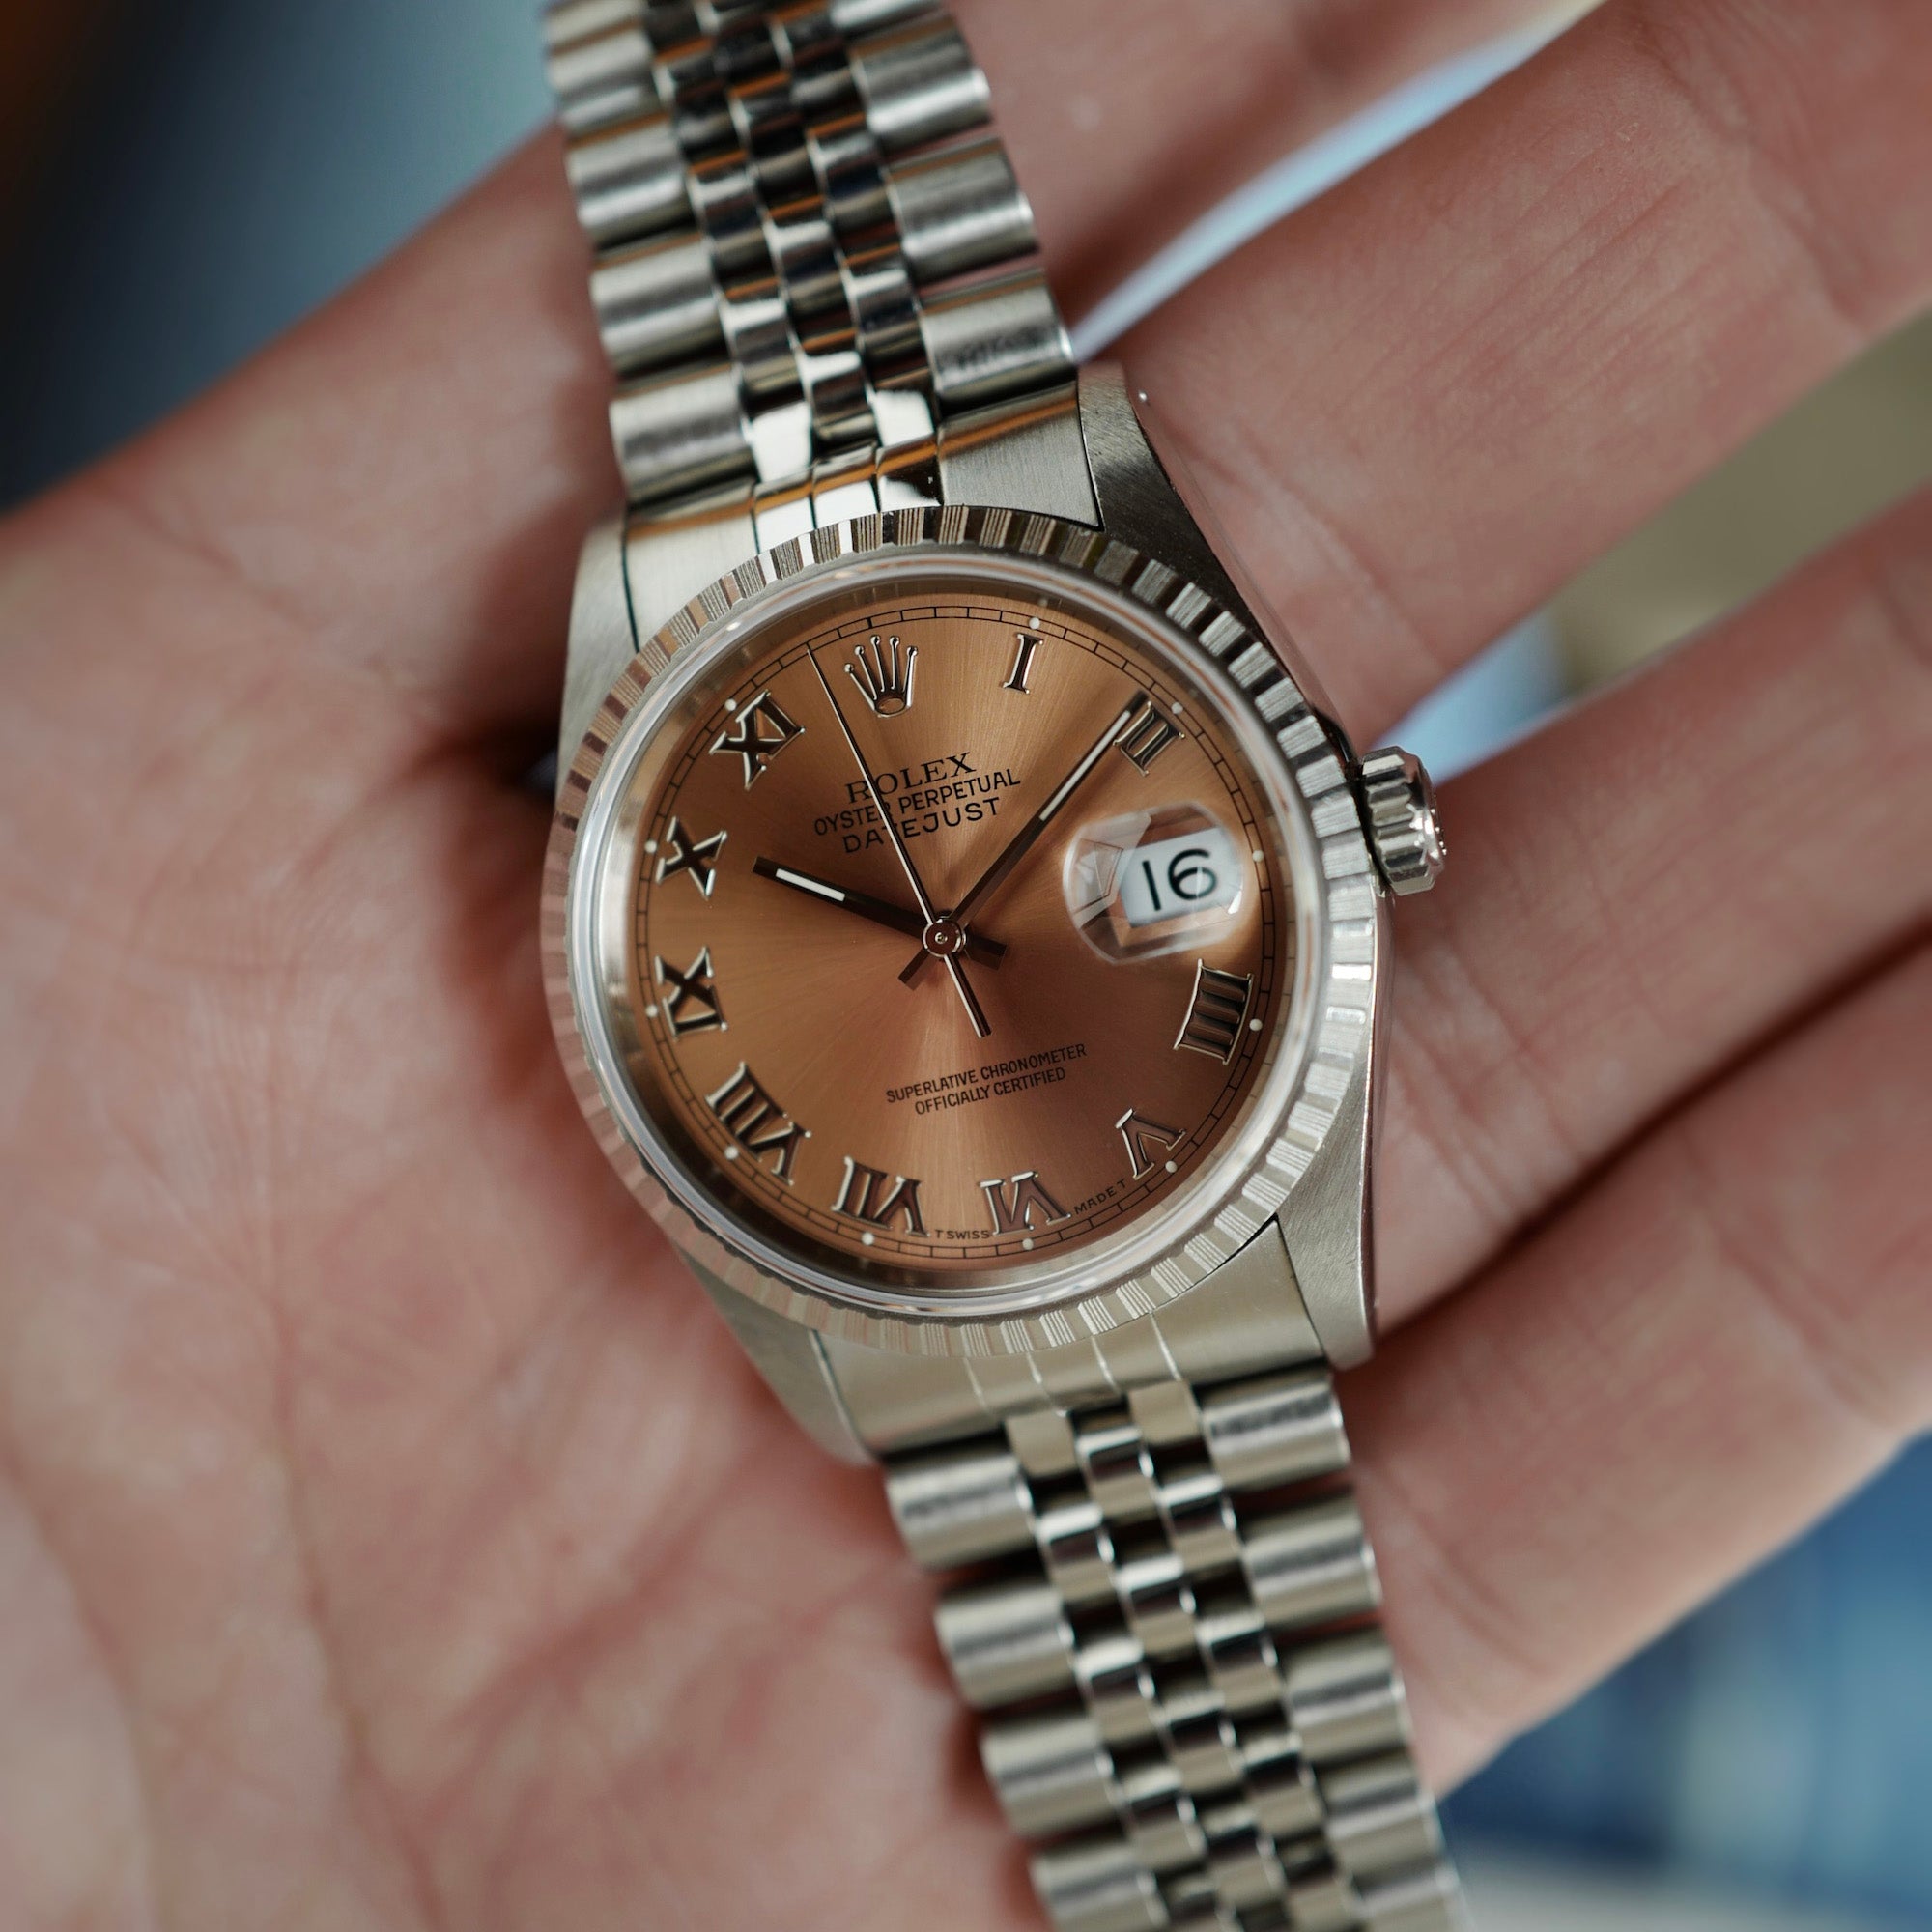 Rolex Steel Datejust Ref. 16220 with Salmon Dial